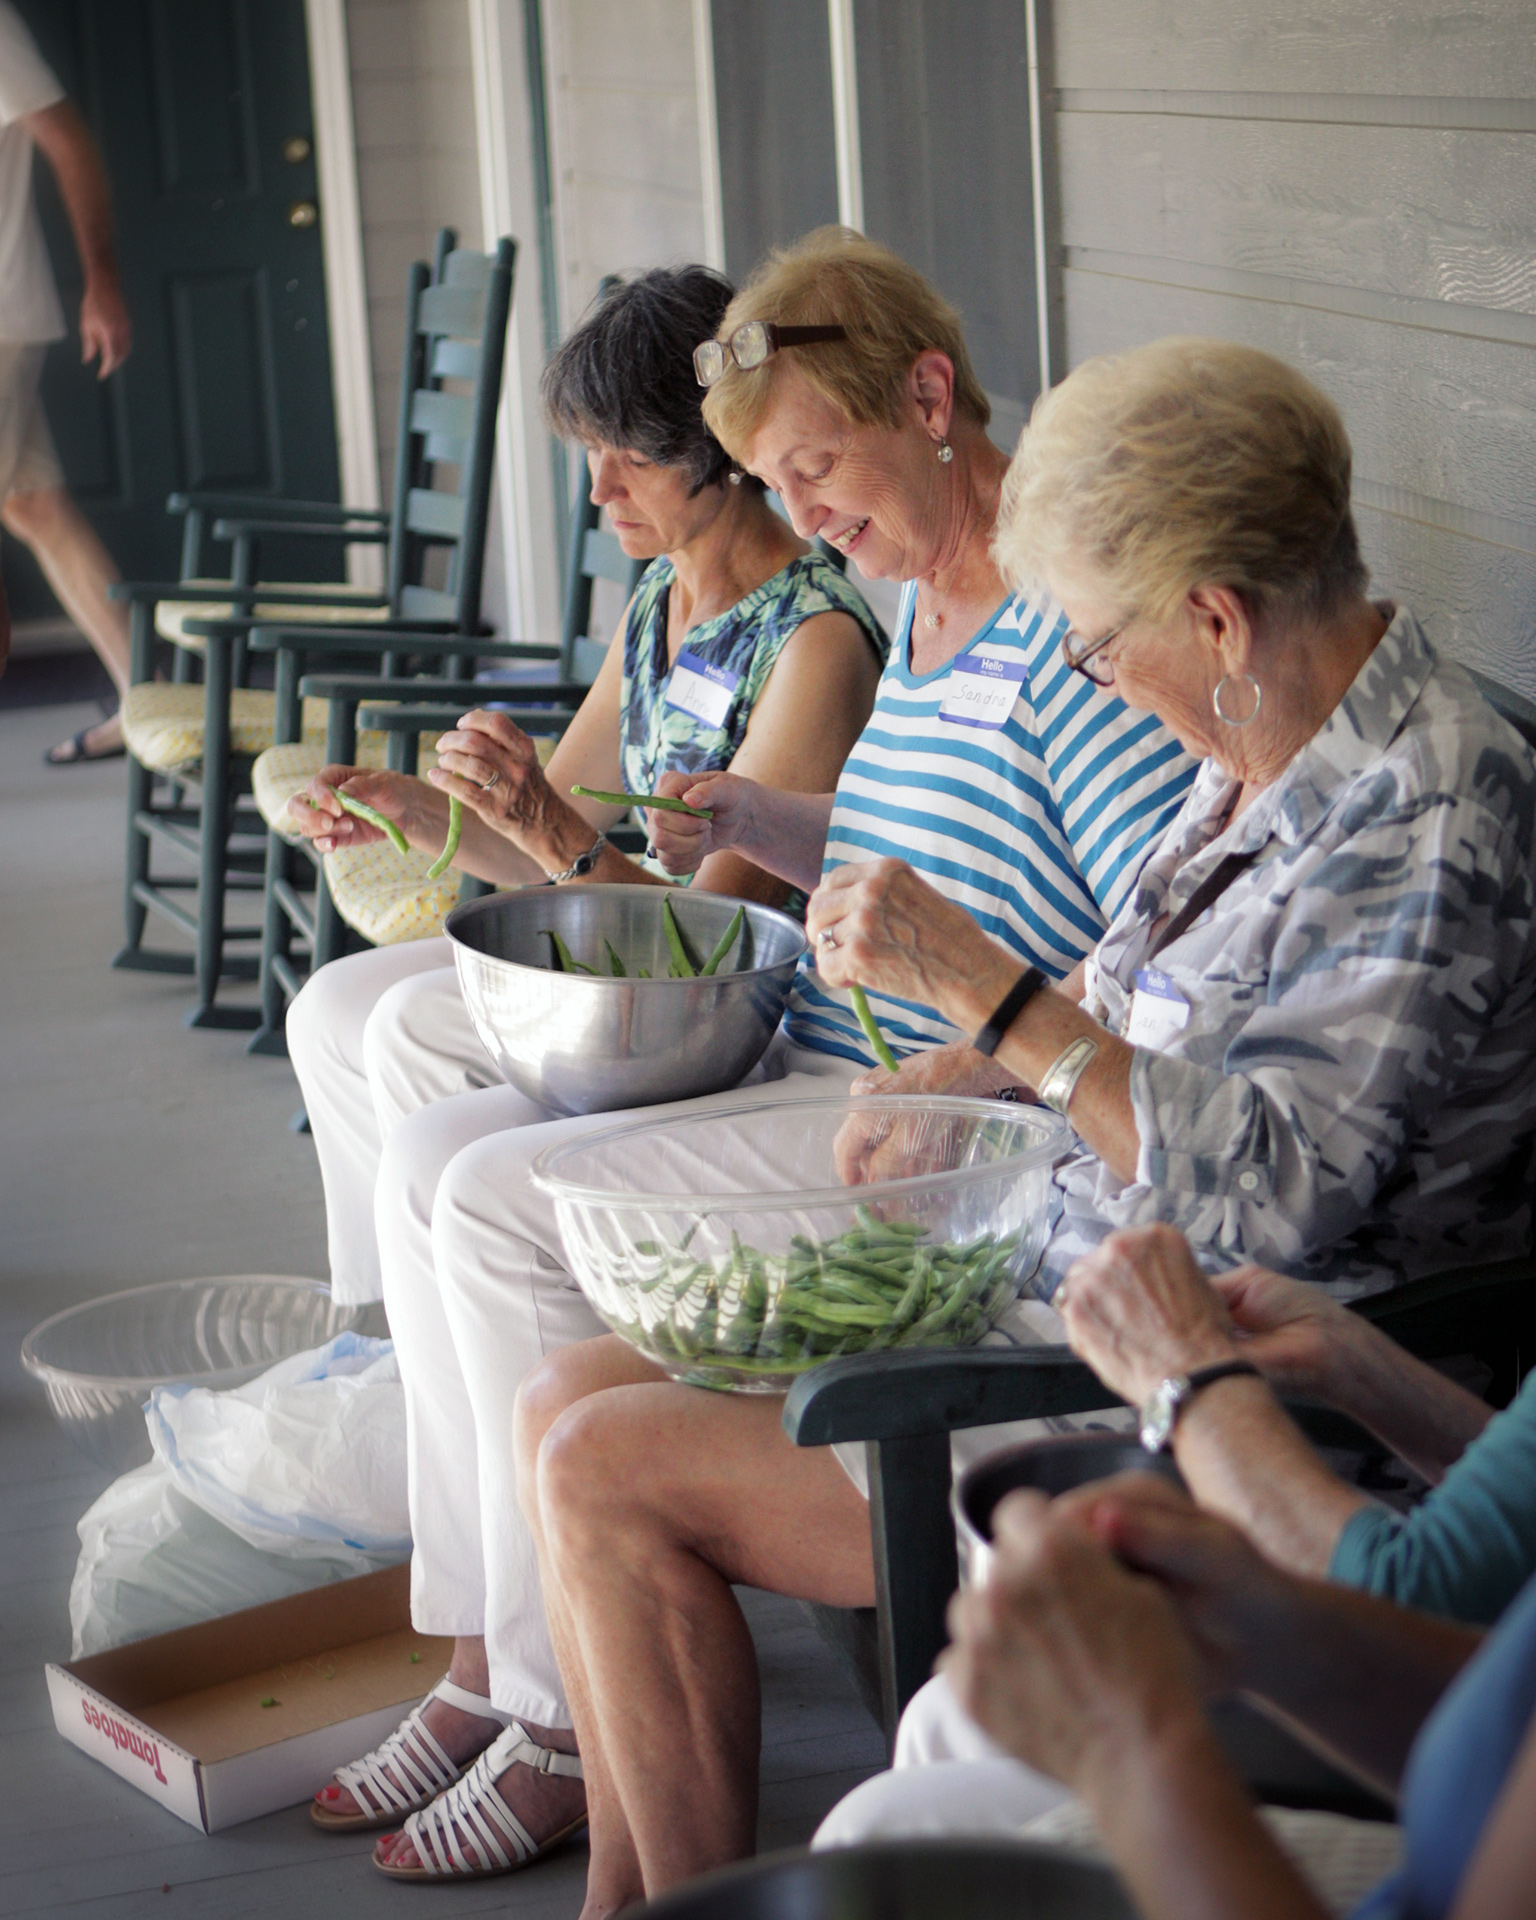 Members of the Jones family string beans on the porch. (Photograph by Kathleen Hunter)